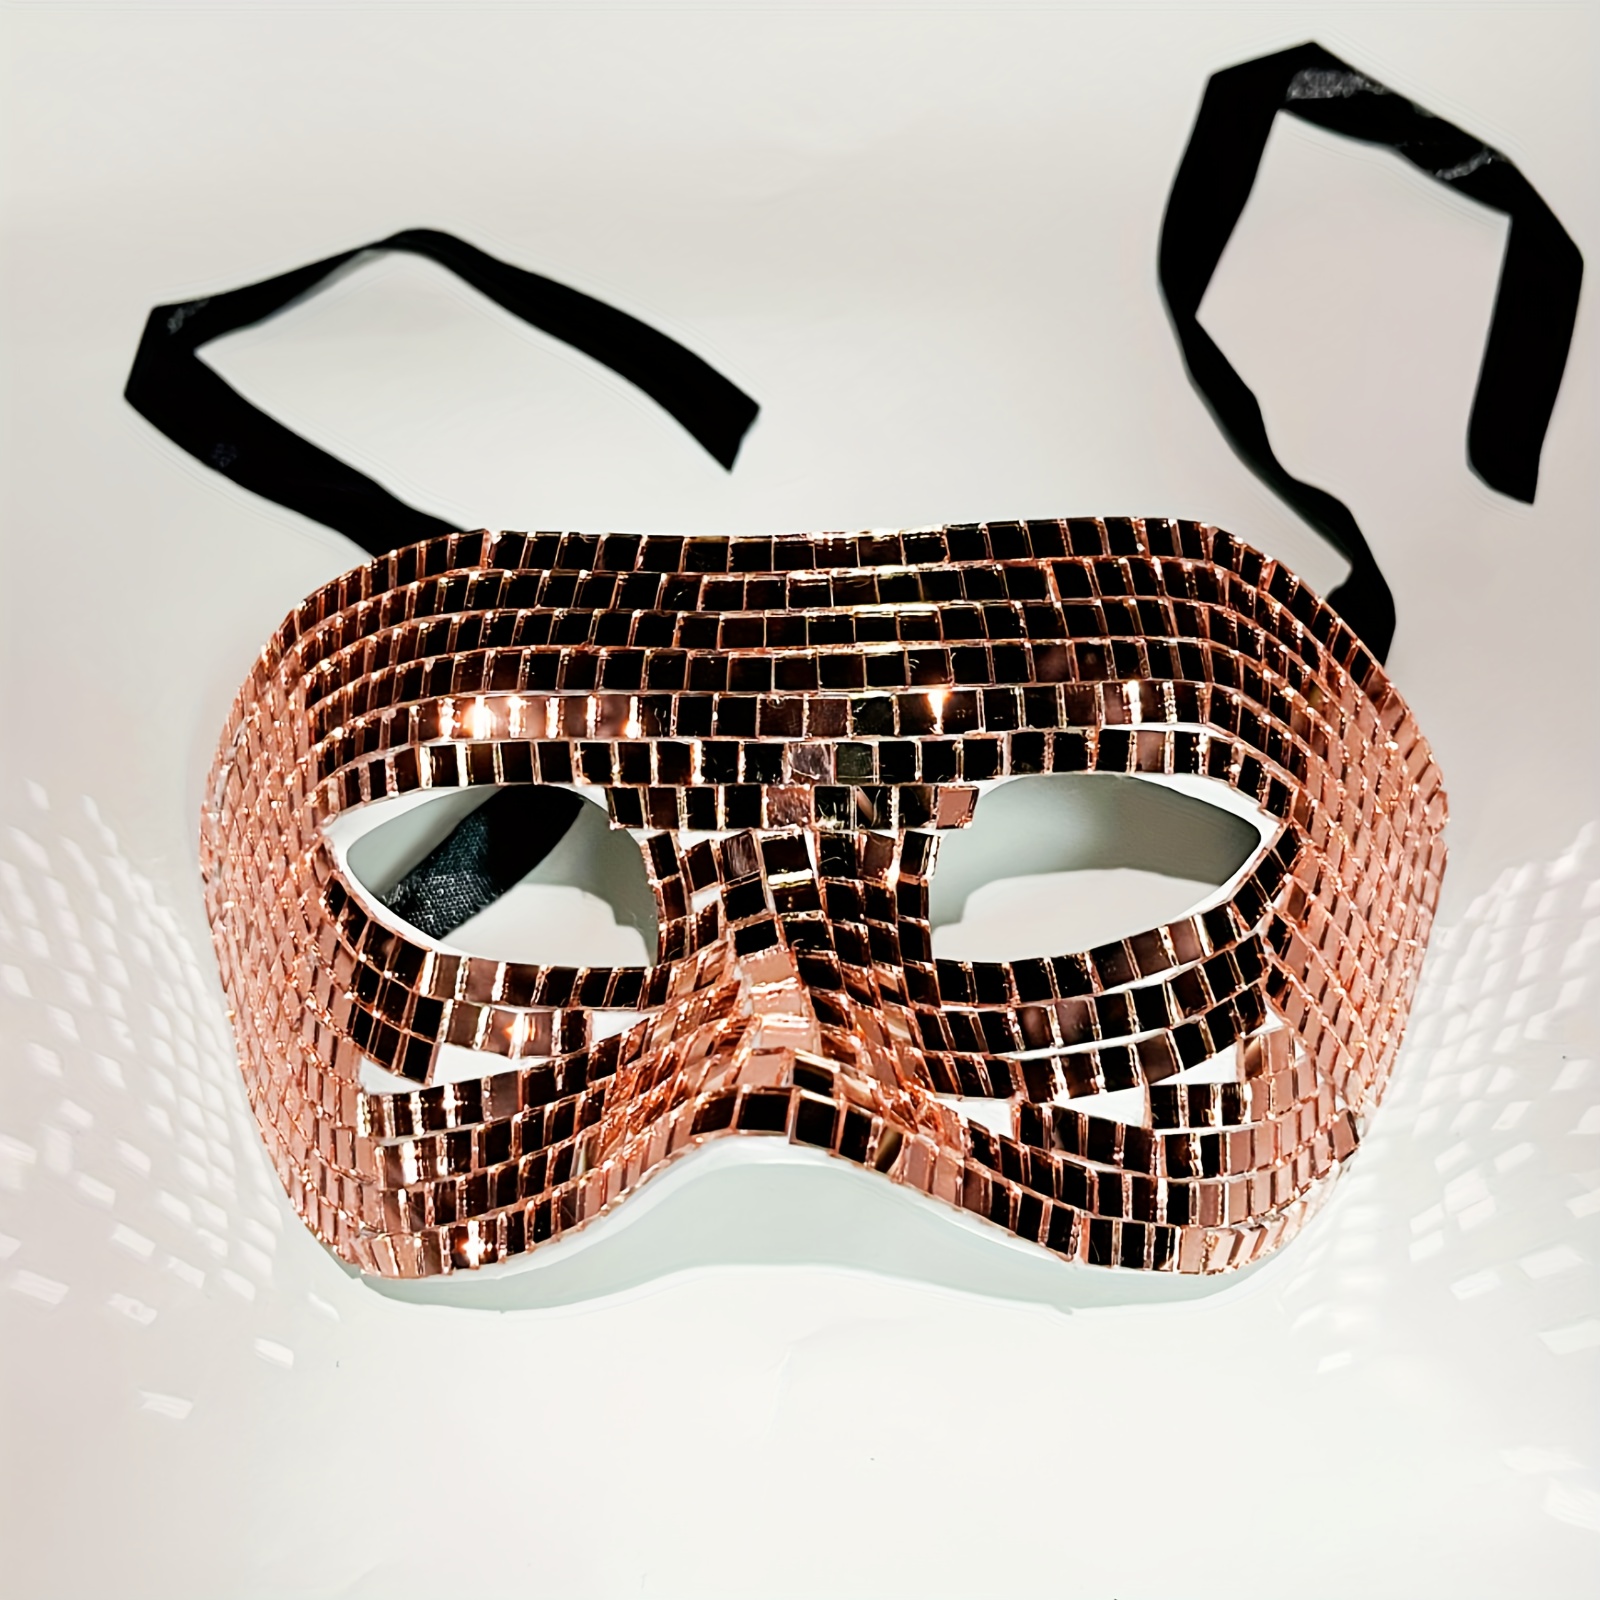 1PC Luxurious Eye Mask Full Rhinestone Decoration Glitter Mask Women  Dancing Ball Themed Party Cosplay Accessories